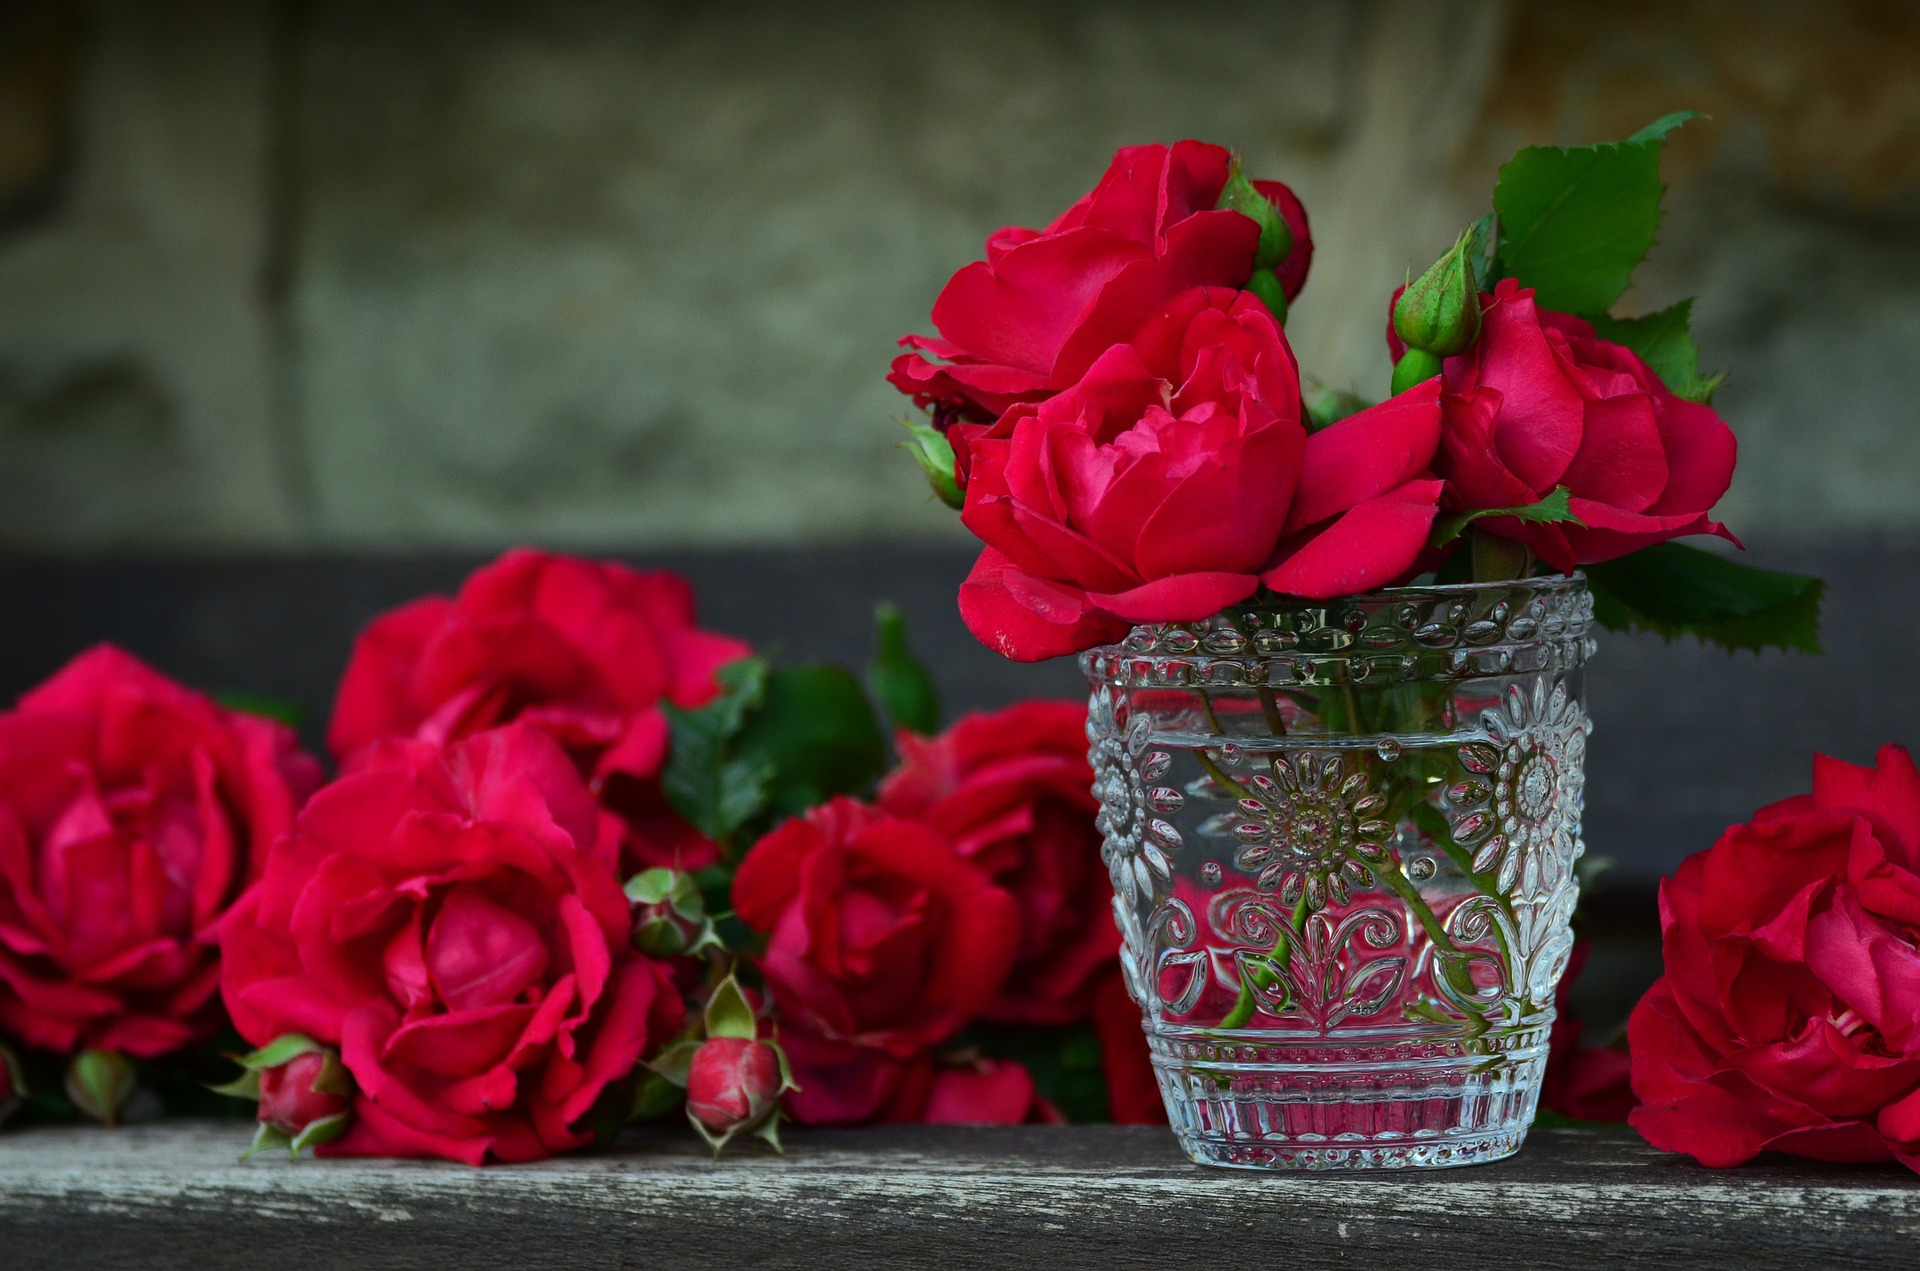 Edible Roses Boast Sweet Health Benefits — If They're Safe